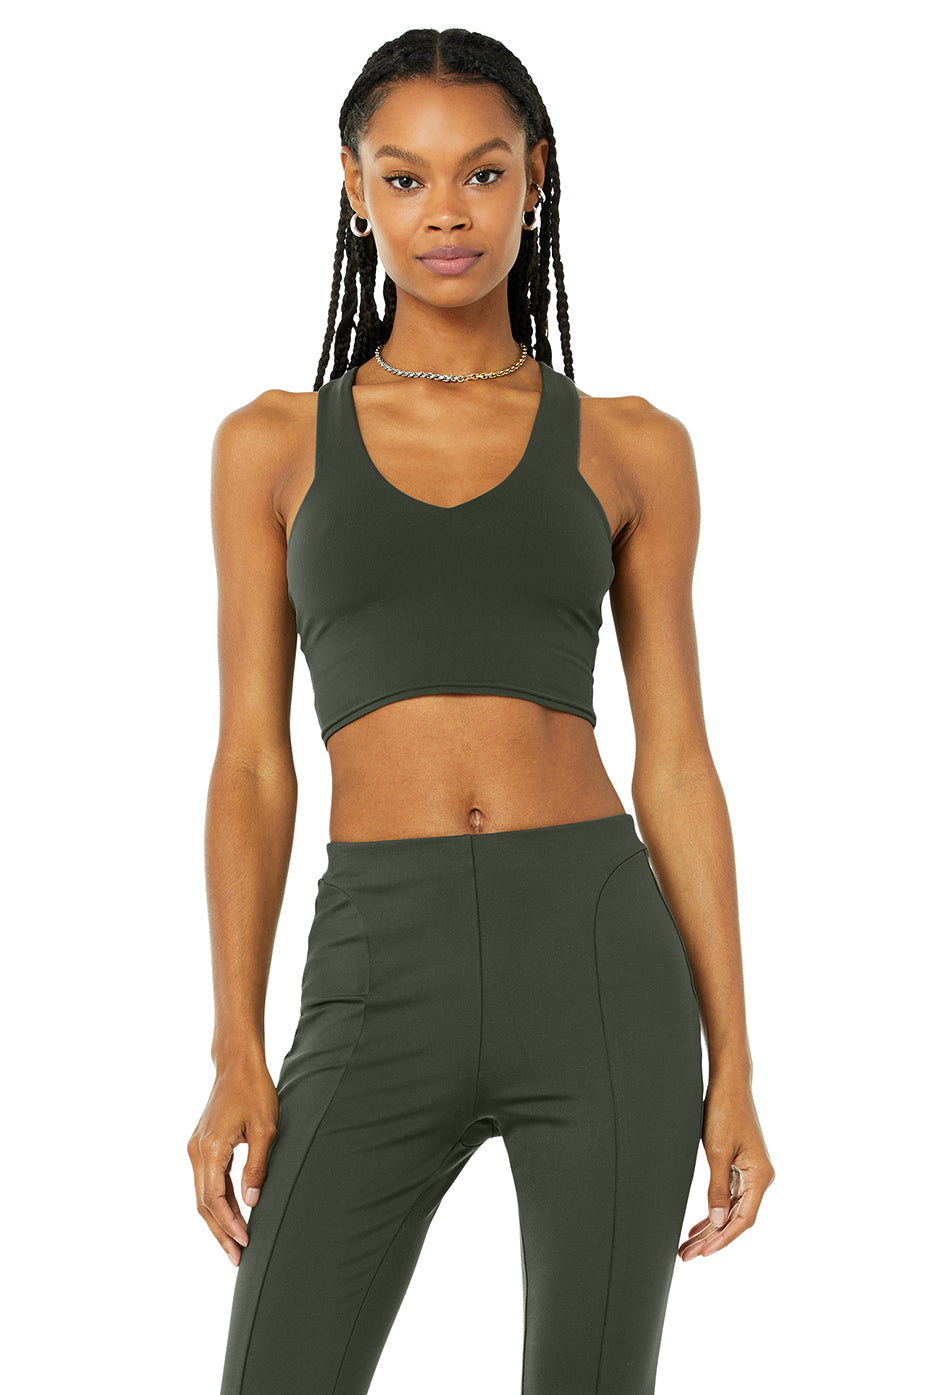 Airbrush Real Bra Tank Top in Dark Cactus by Alo Yoga - Work Well Daily